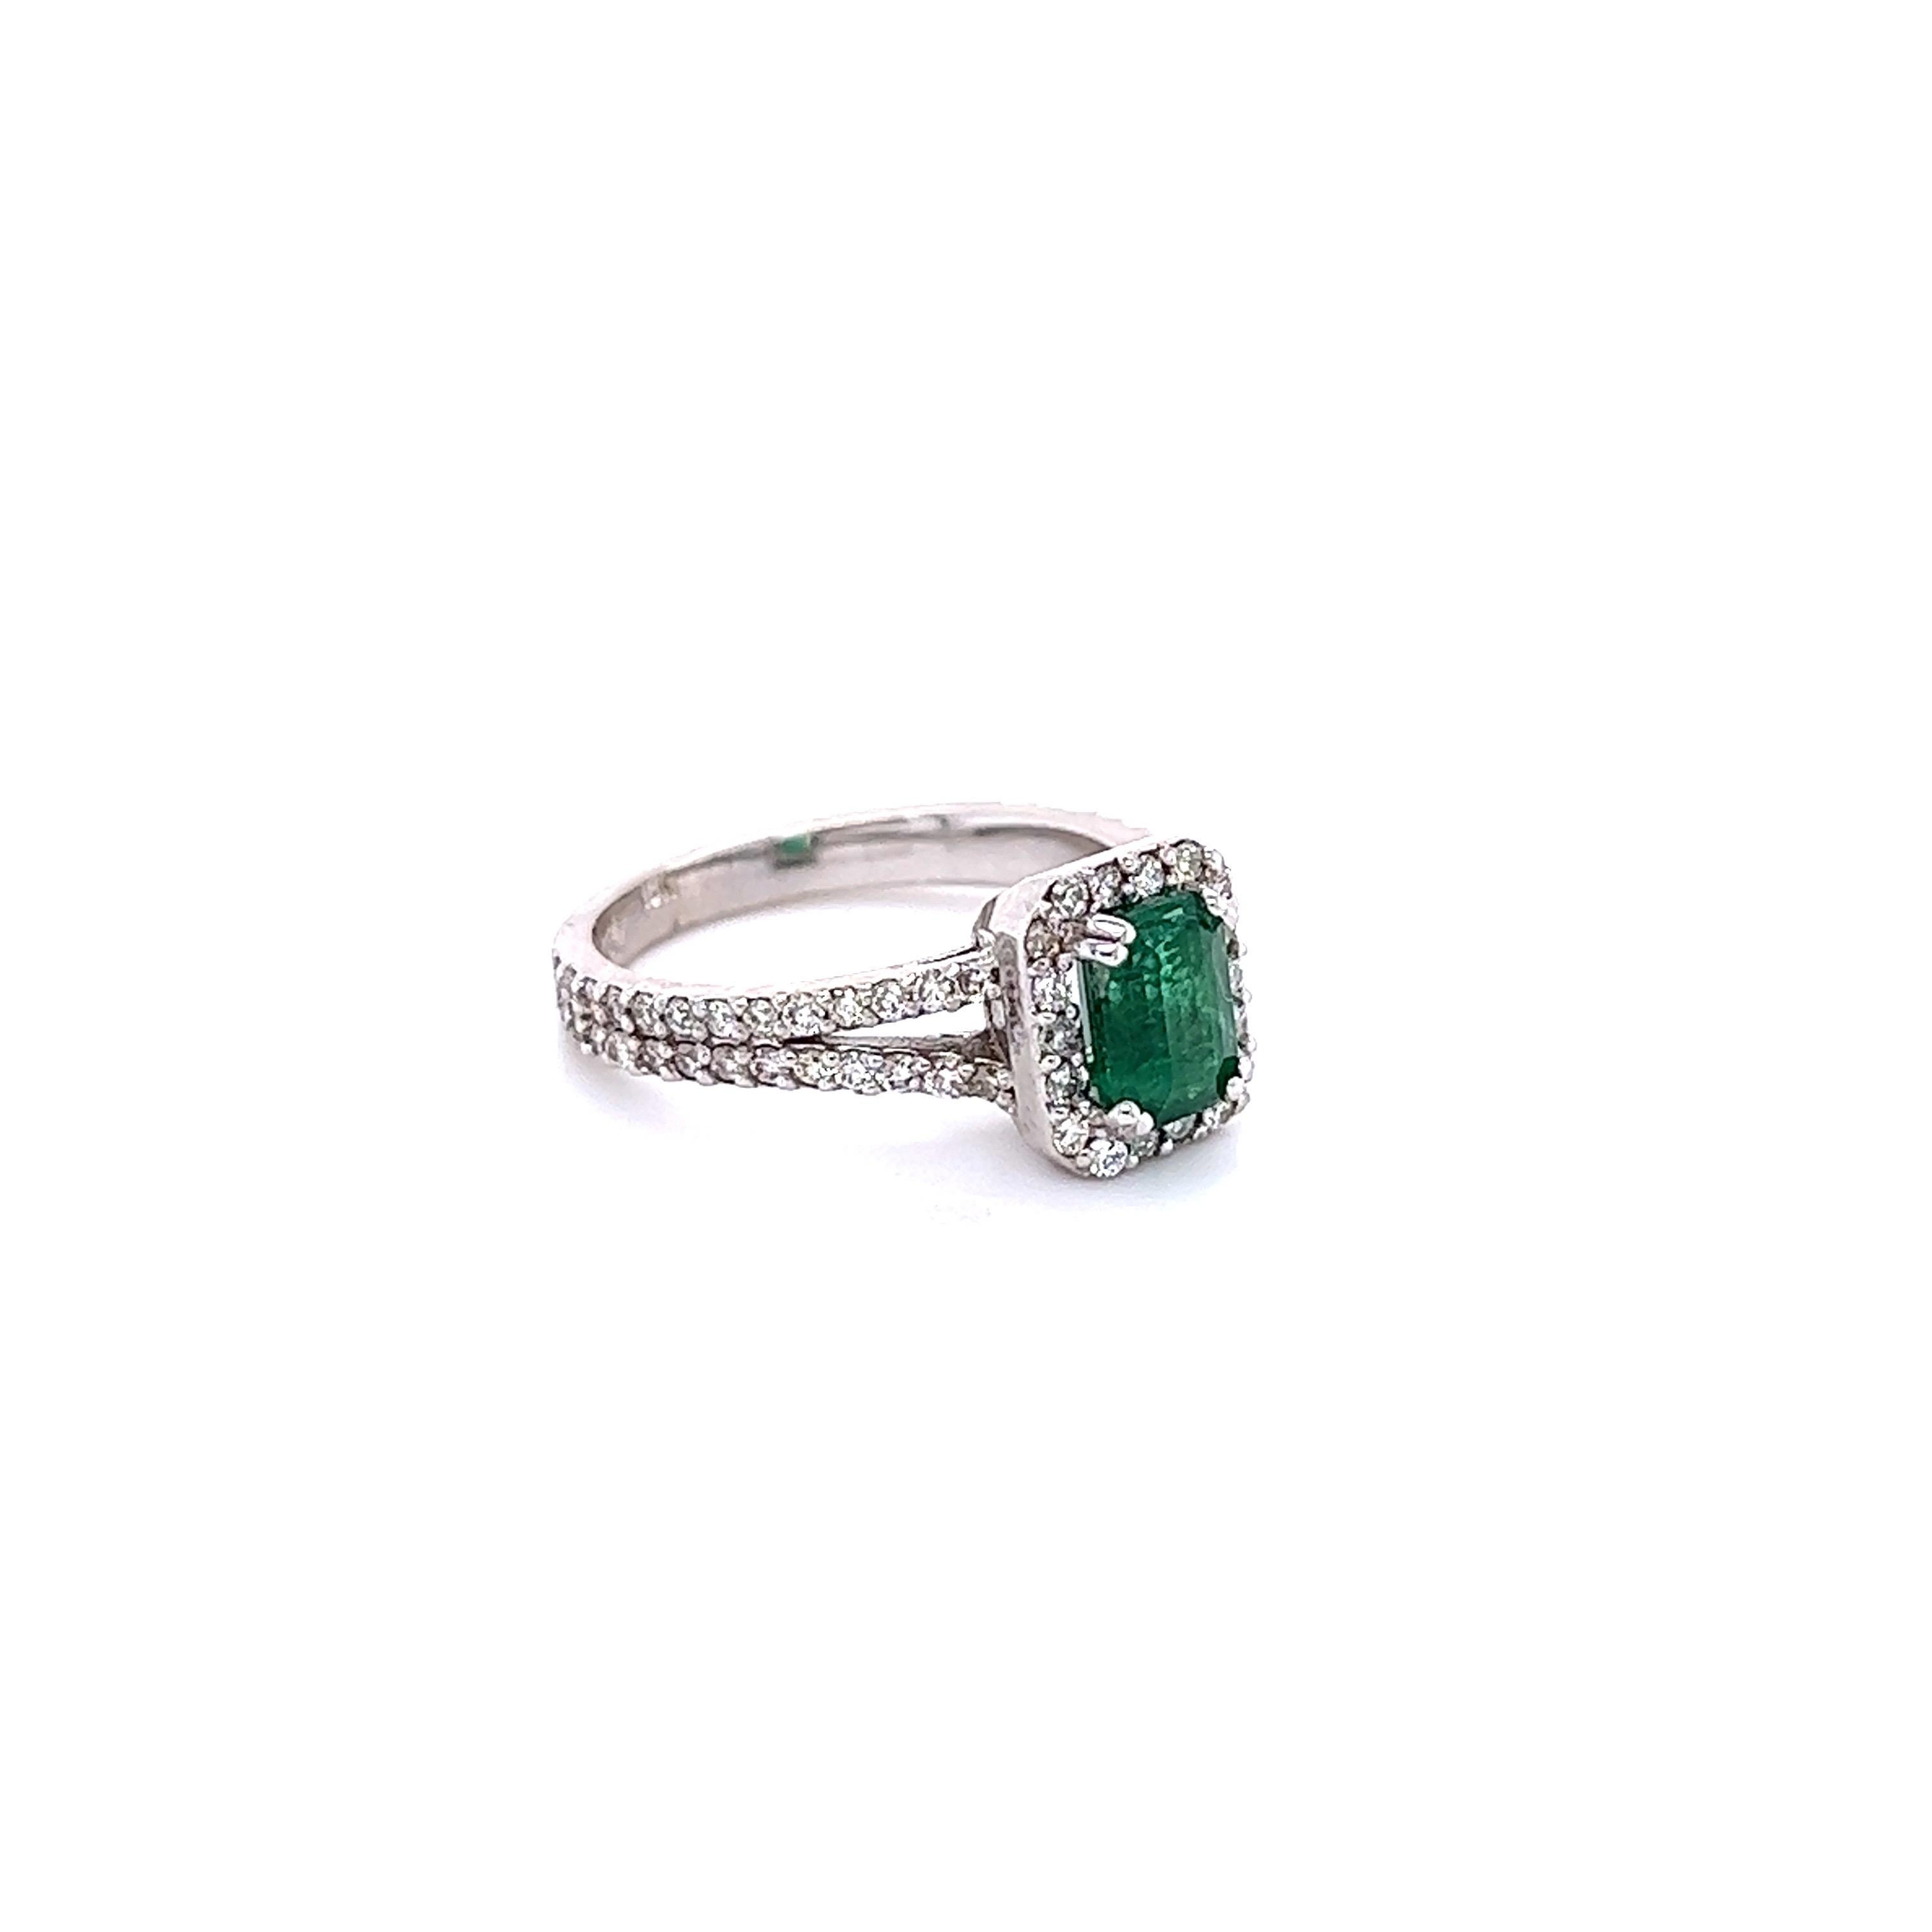 A classic setting holding a Natural Emerald Cut Emerald that weighs 1.14 carats. Surrounded by Natural Round Cut Diamonds that weigh 0.71 carats with a clarity & color of VS-H.  The total carat weight of the ring is 1.85 carats.

The Emerald Cut